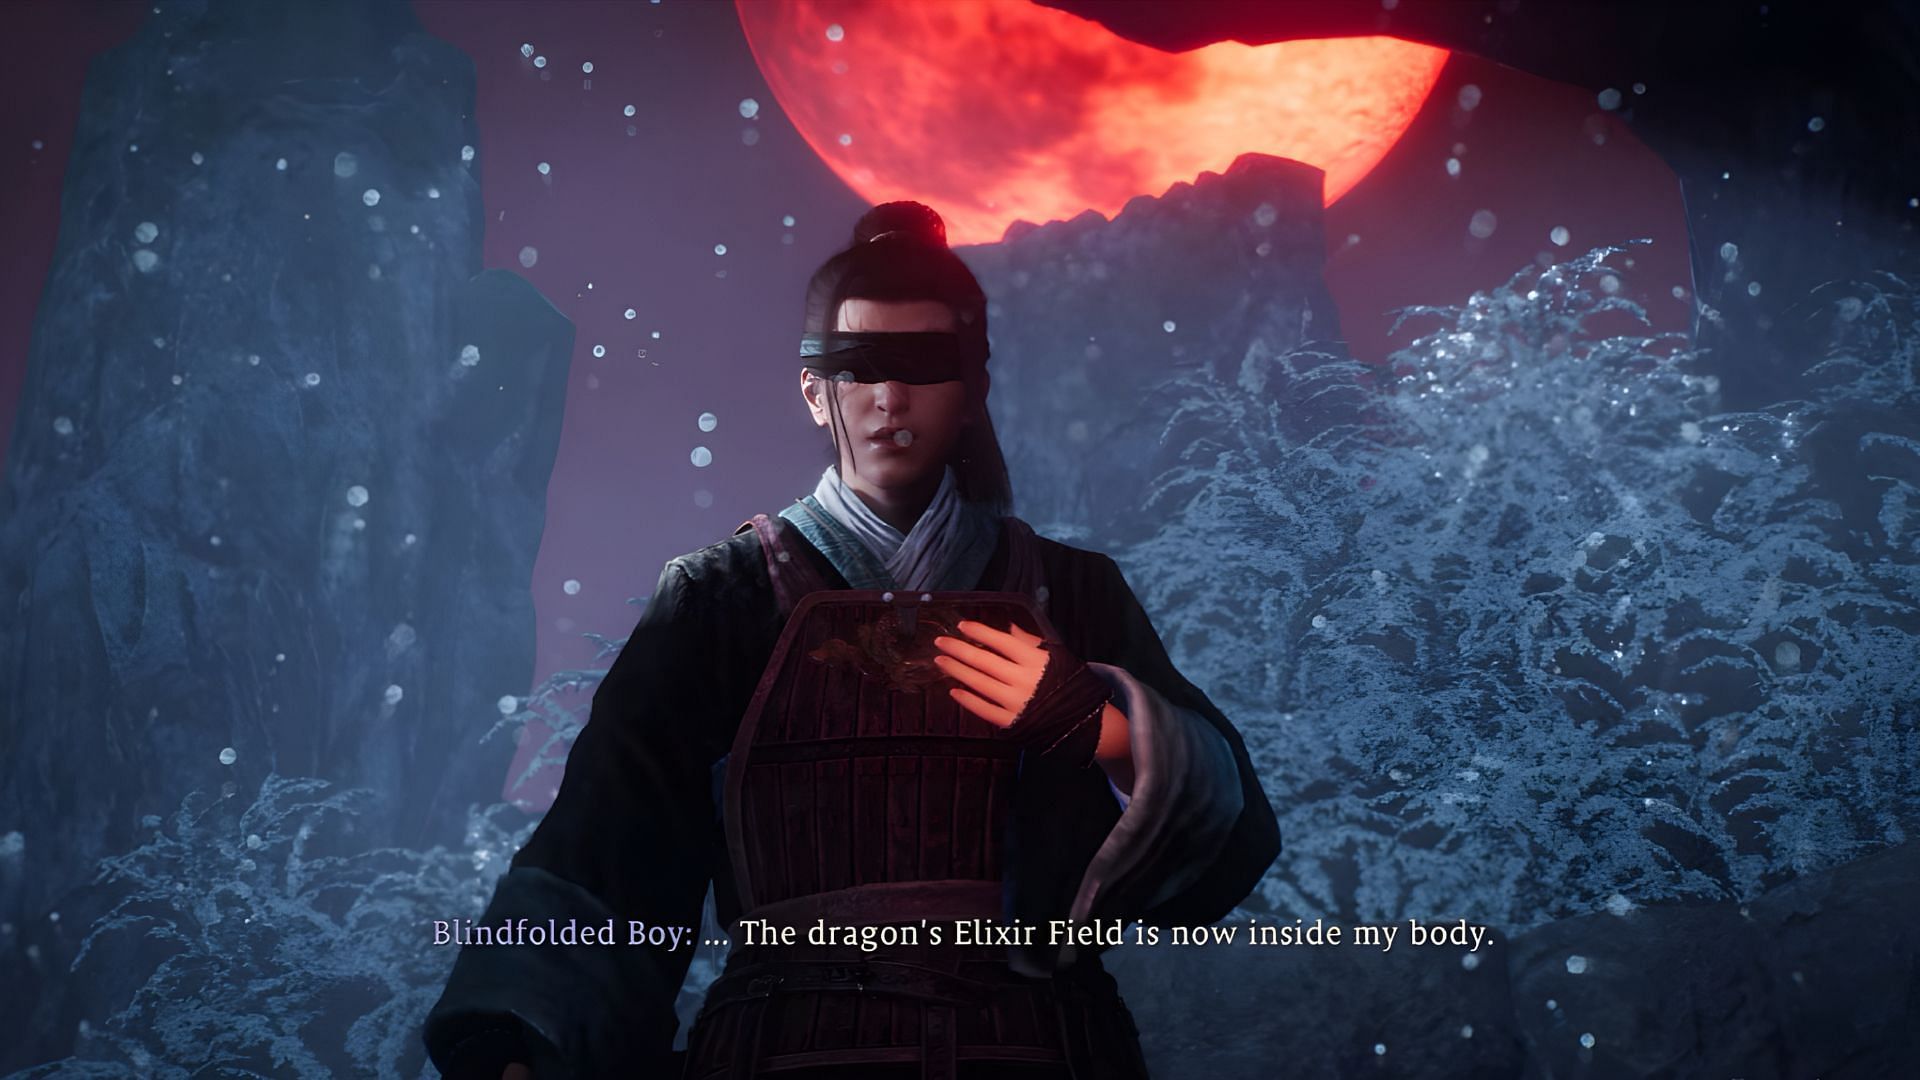 How to defeat the Blindfolded Boy in Wo Long: Fallen Dynasty? (Image via Koei Tecmo)